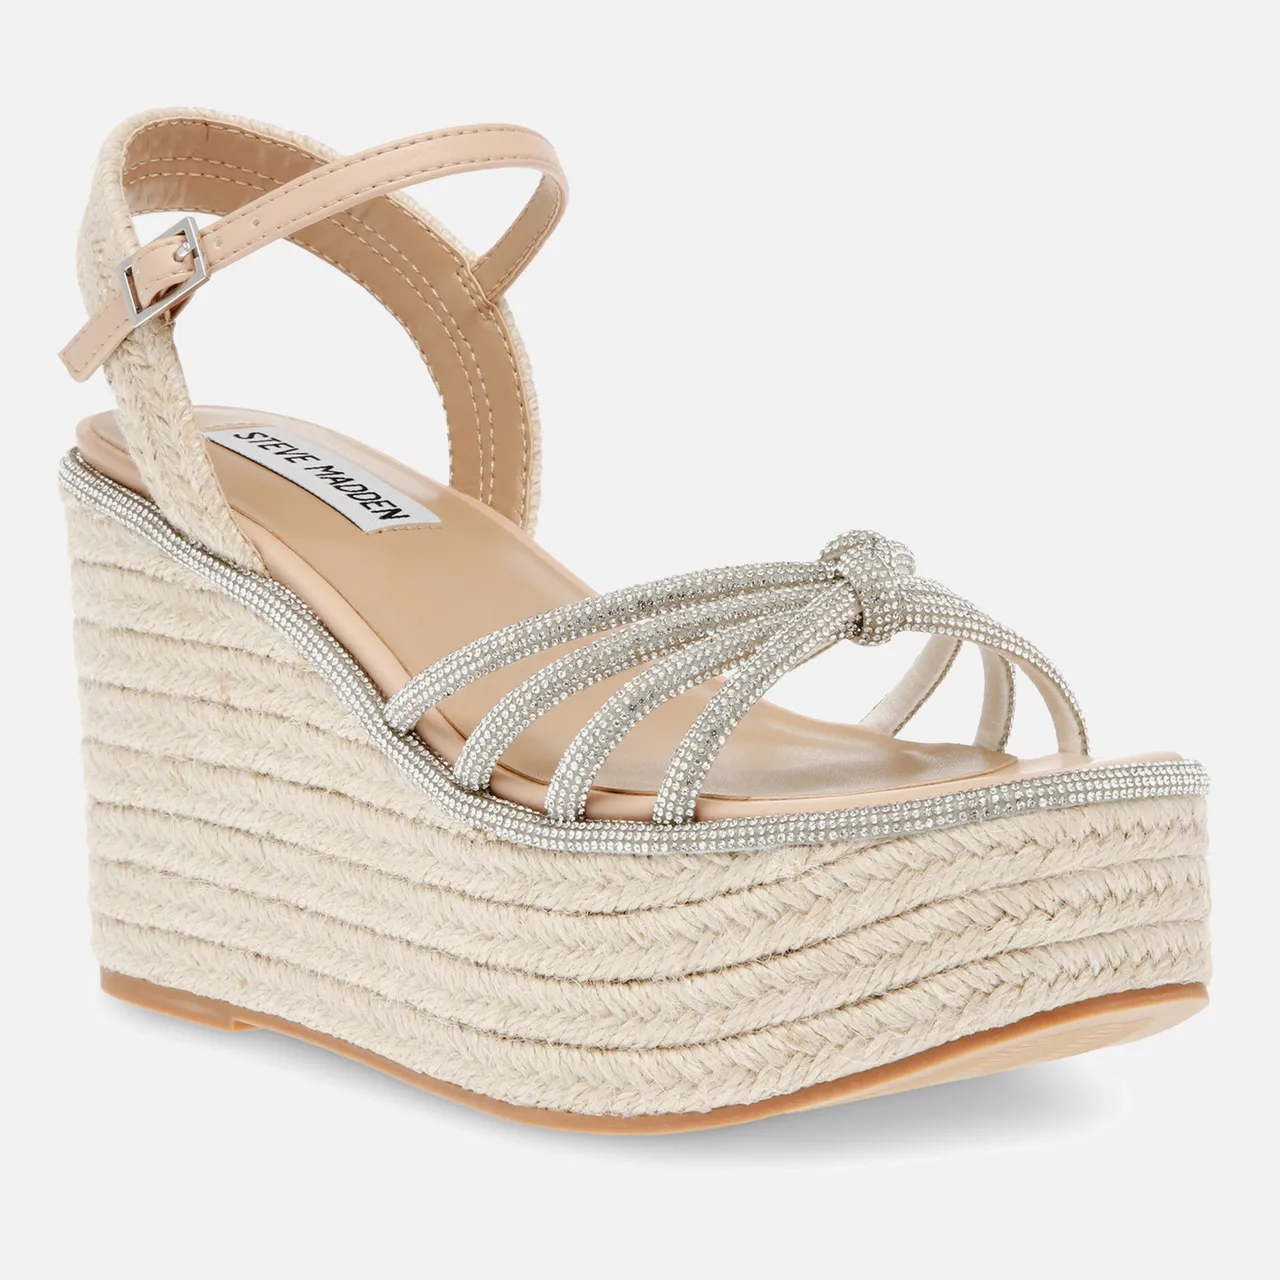 Steve Madden Women's Jaded Faux Leather Wedge Espadrille Sandals